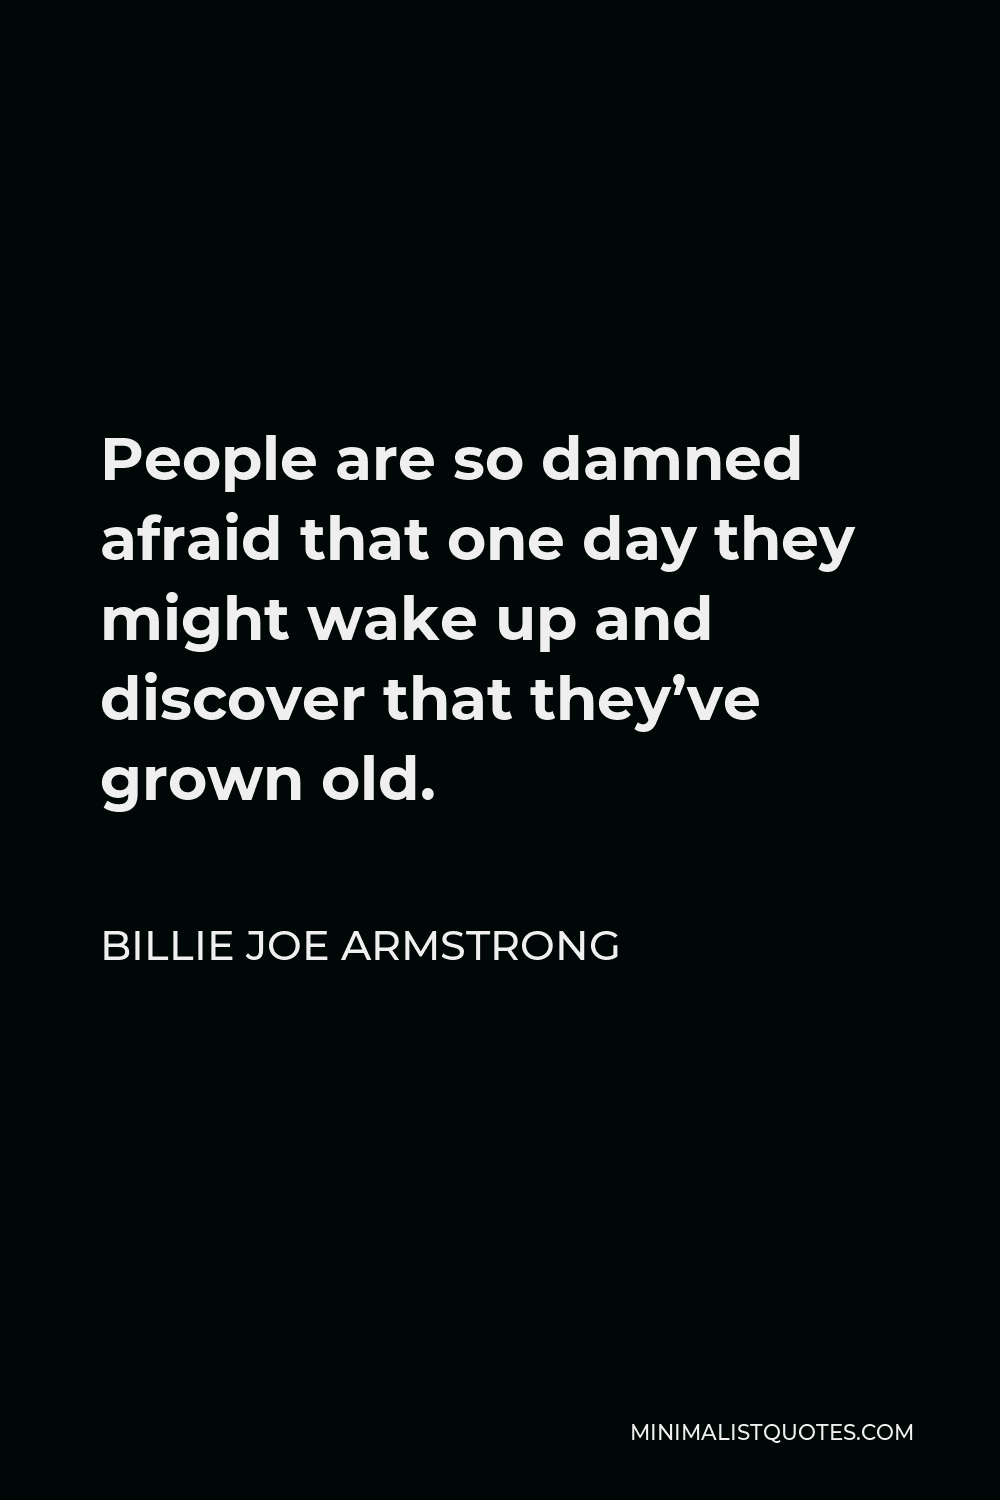 Billie Joe Armstrong Quote - People are so damned afraid that one day they might wake up and discover that they’ve grown old.